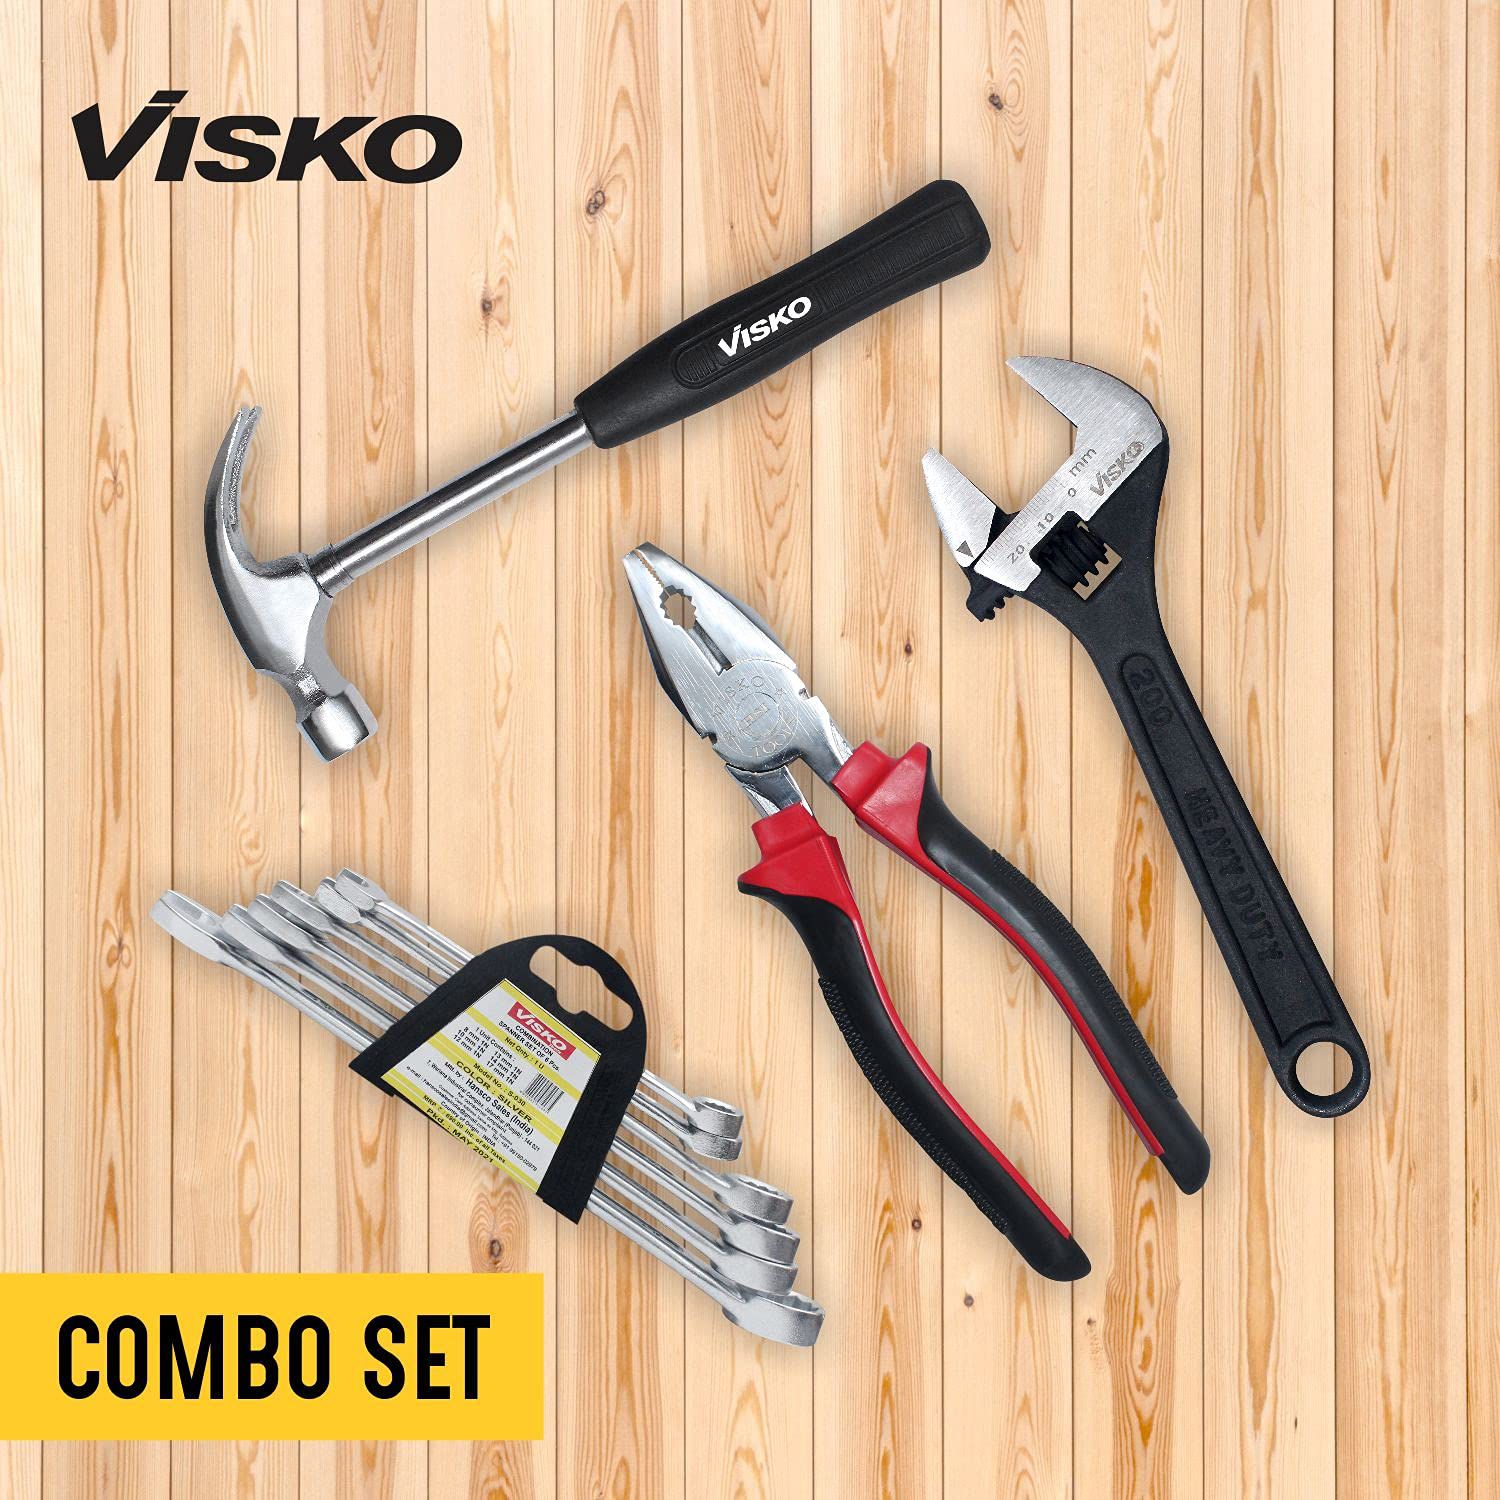 Visko Hand Tools Combo ,814 Tools Combo With 261 Lineman Plier (Length : 8 inch),331 Phosphate Finish Single Sided Open End Wrench ,Steel Shaft 12.7cm Claw Hammer ,Spanner Set Combination Spanner Set of 6 Pcs